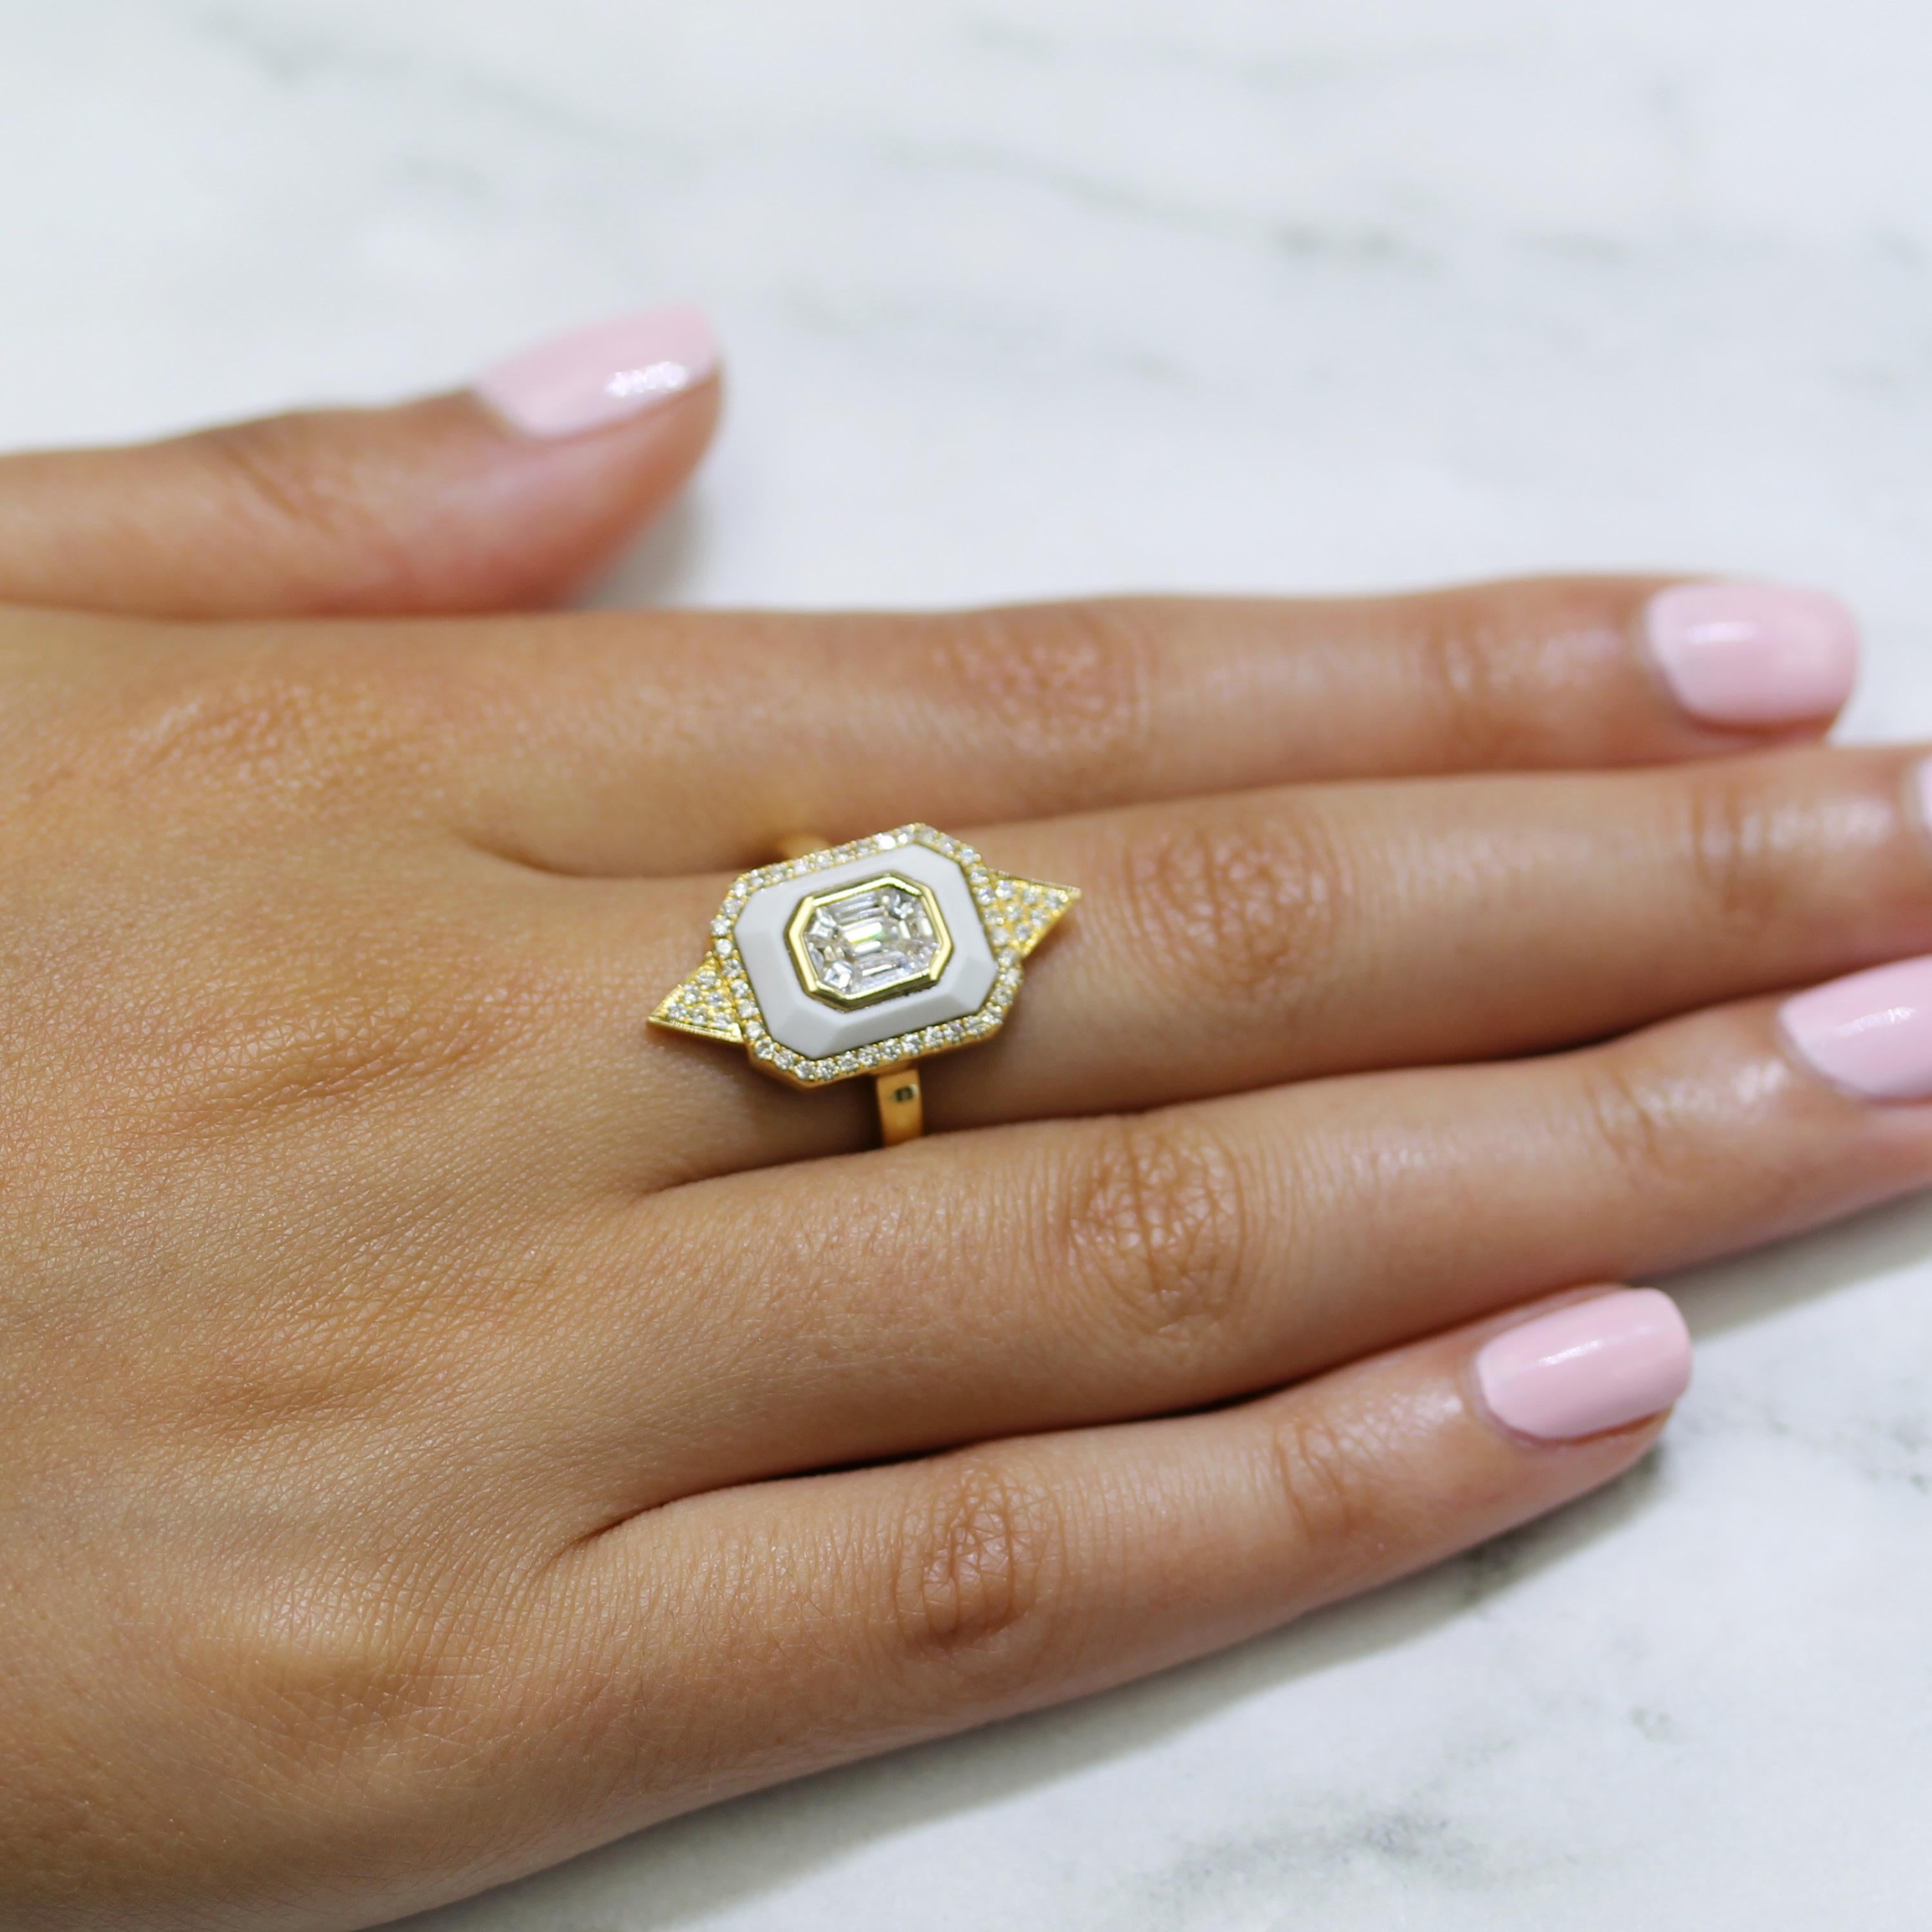 *Please allow 4-6 weeks for production and delivery*

Mykonos Ring featuring an Invisible-Set Emerald Diamond Center made up of Baguettes, framed in White Agate, in an 18K yellow gold Art-Deco setting. Finger size 6.5, adjustable upon request/quote.